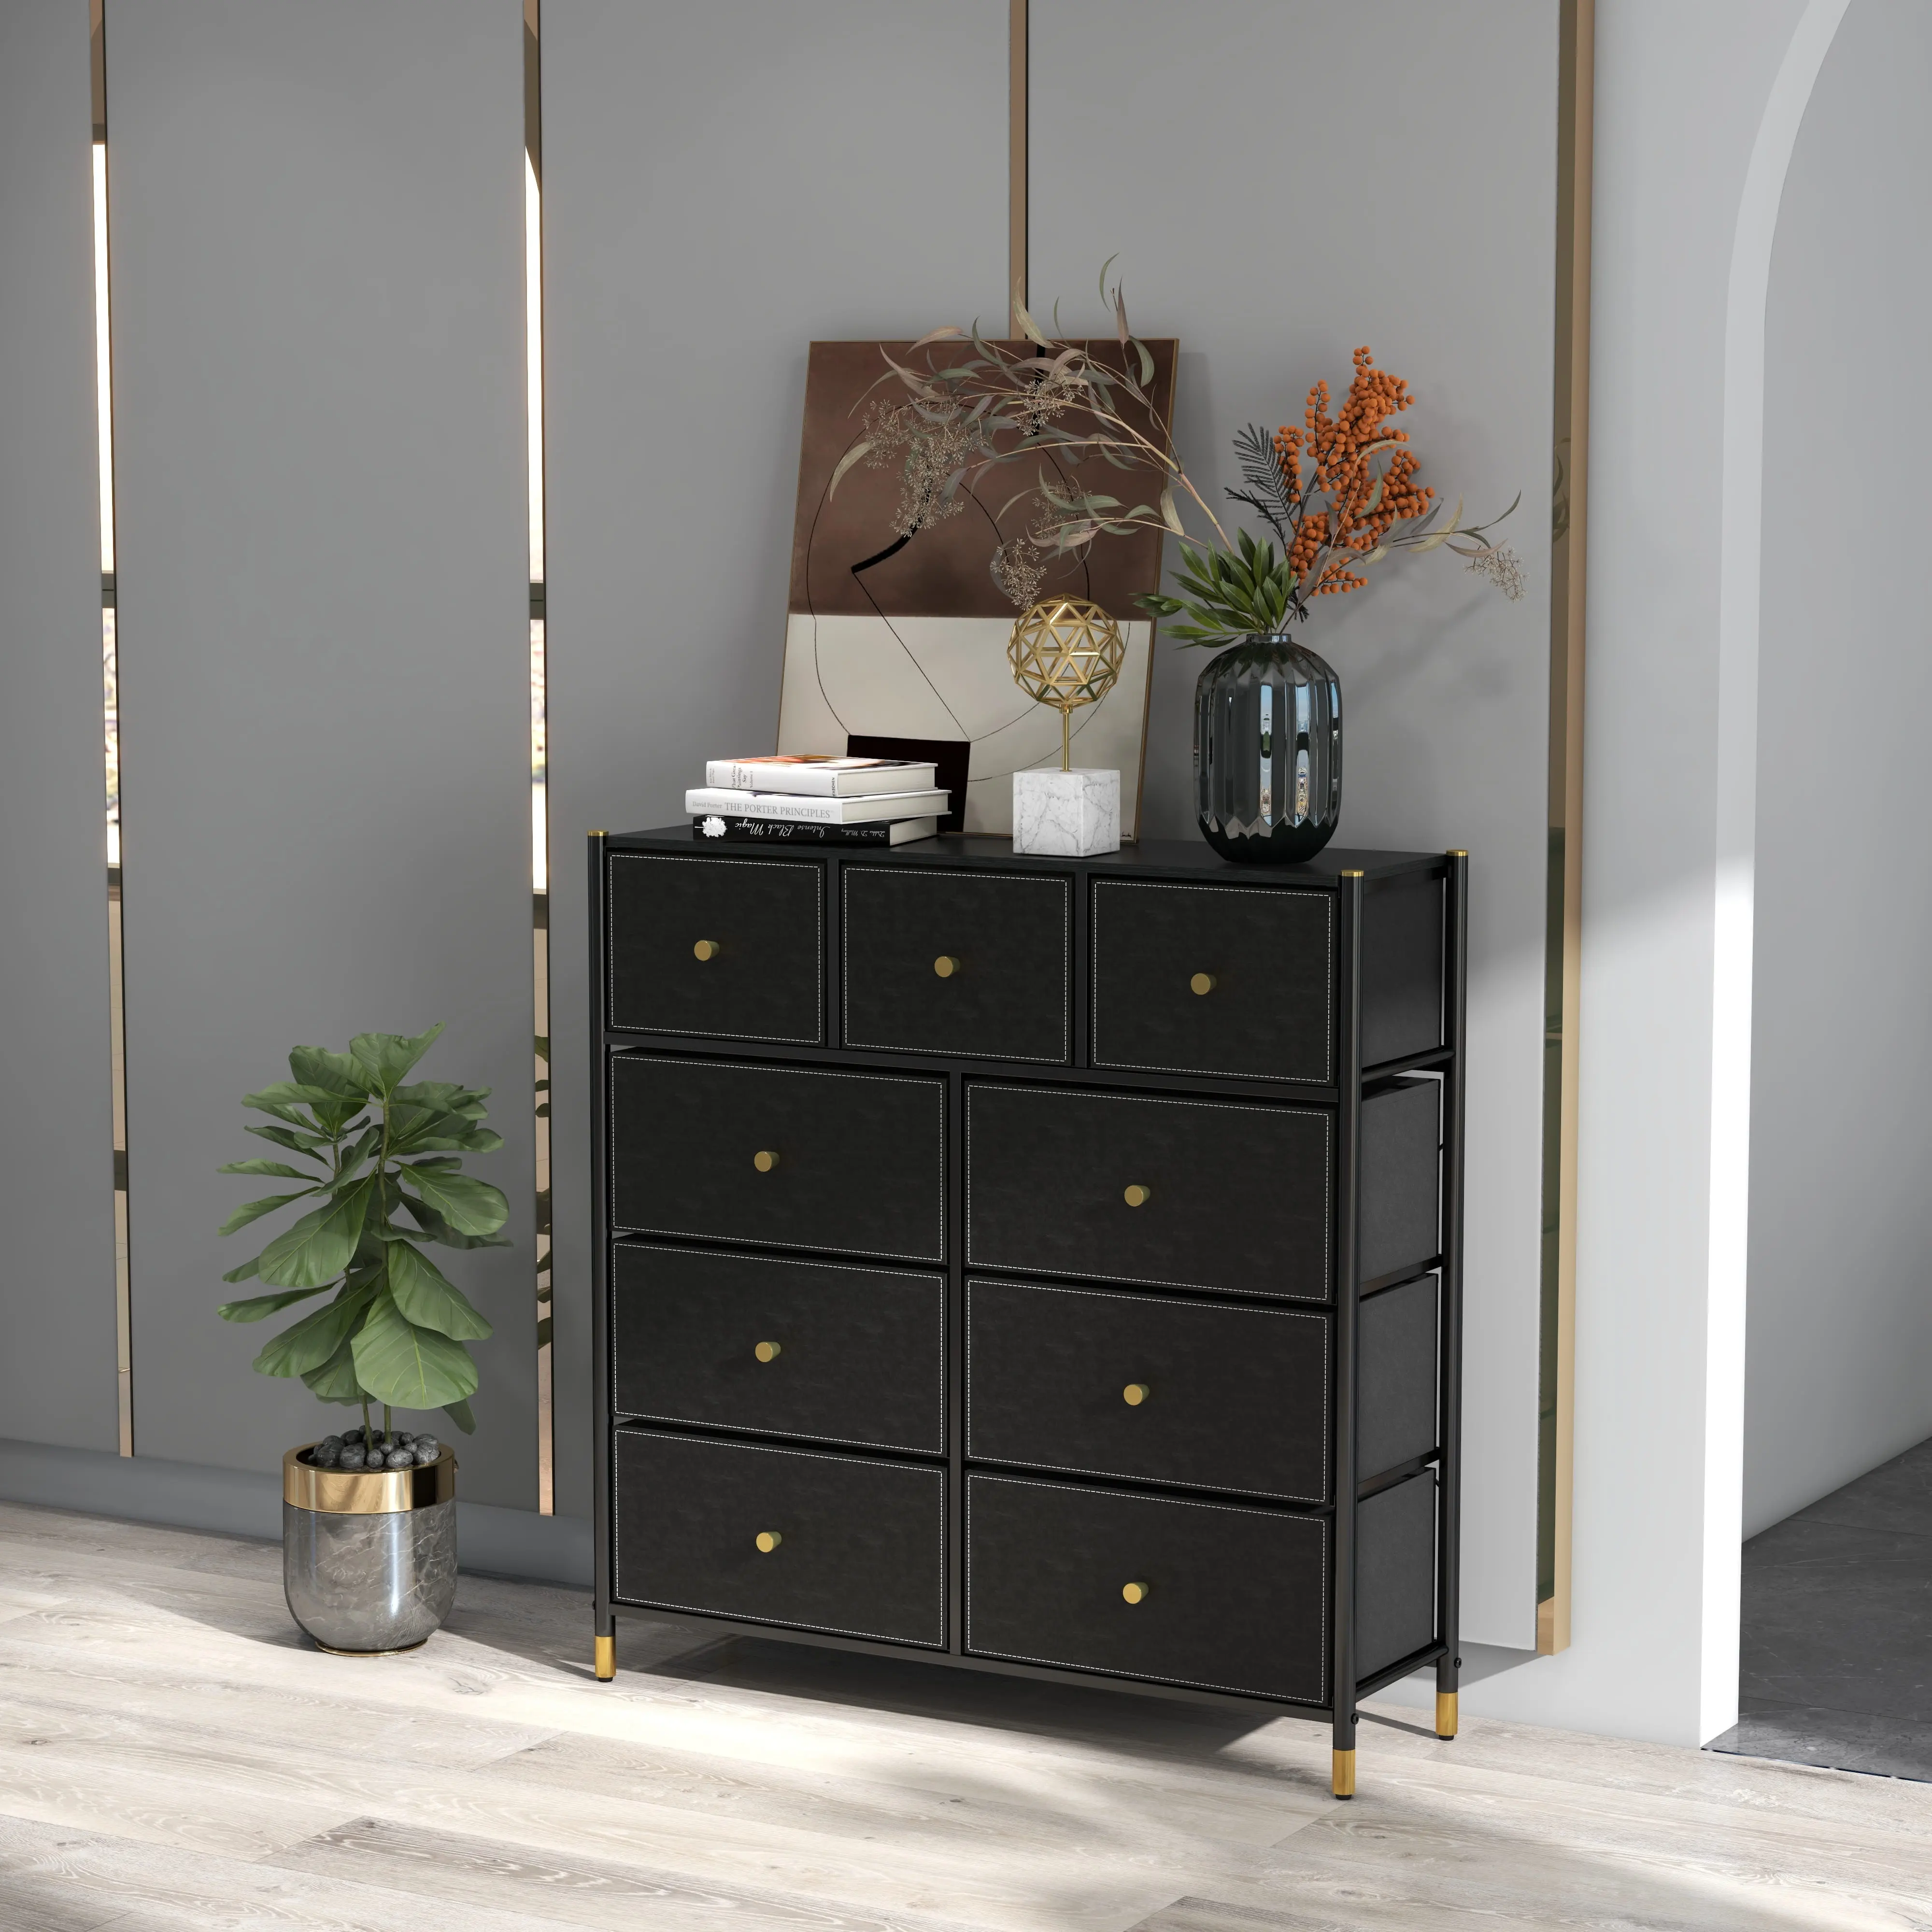 Fabric Tall 8 Drawers Storage Tower Double Dresser Chest Of Drawers For Closet Living Room Hallway With Bins